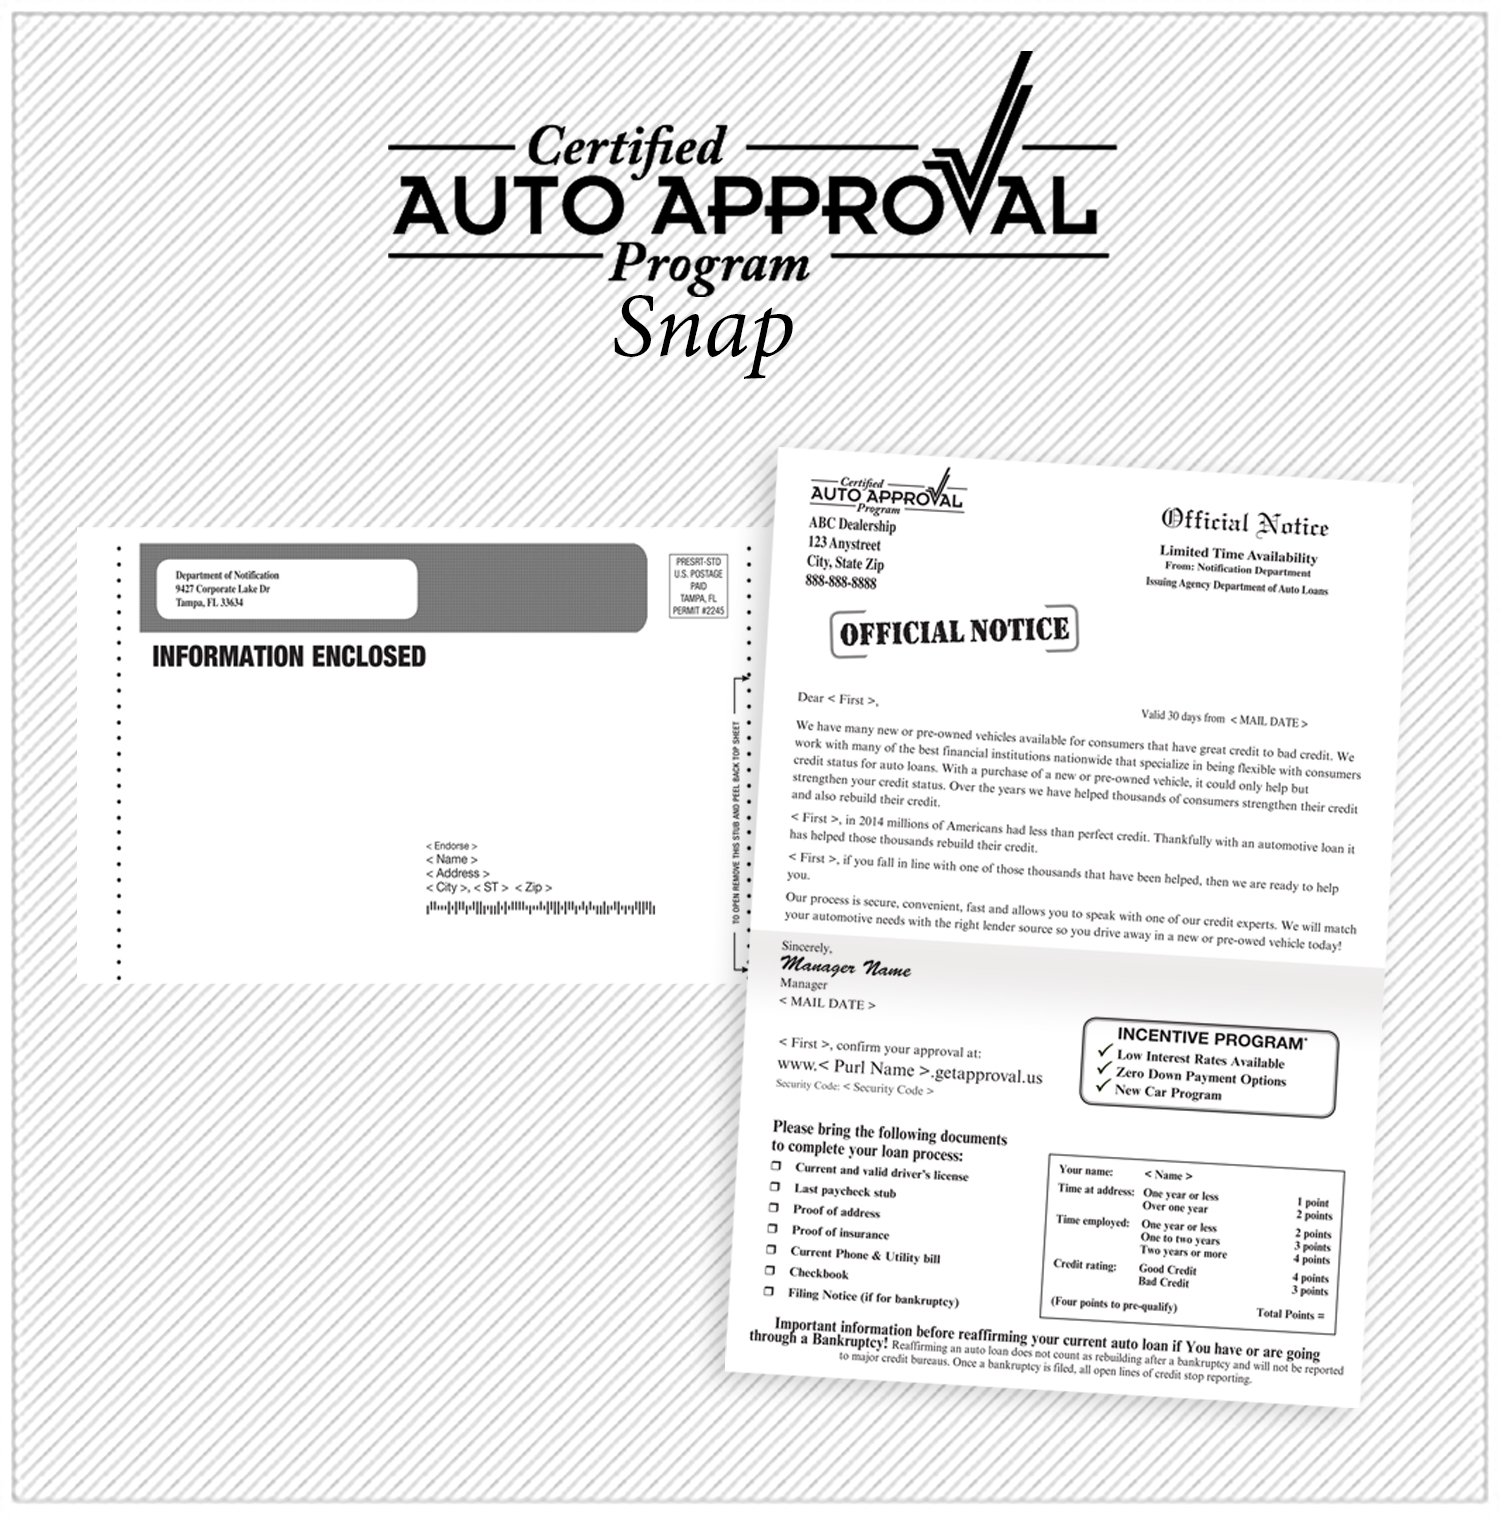 Certified Auto Approval Snap